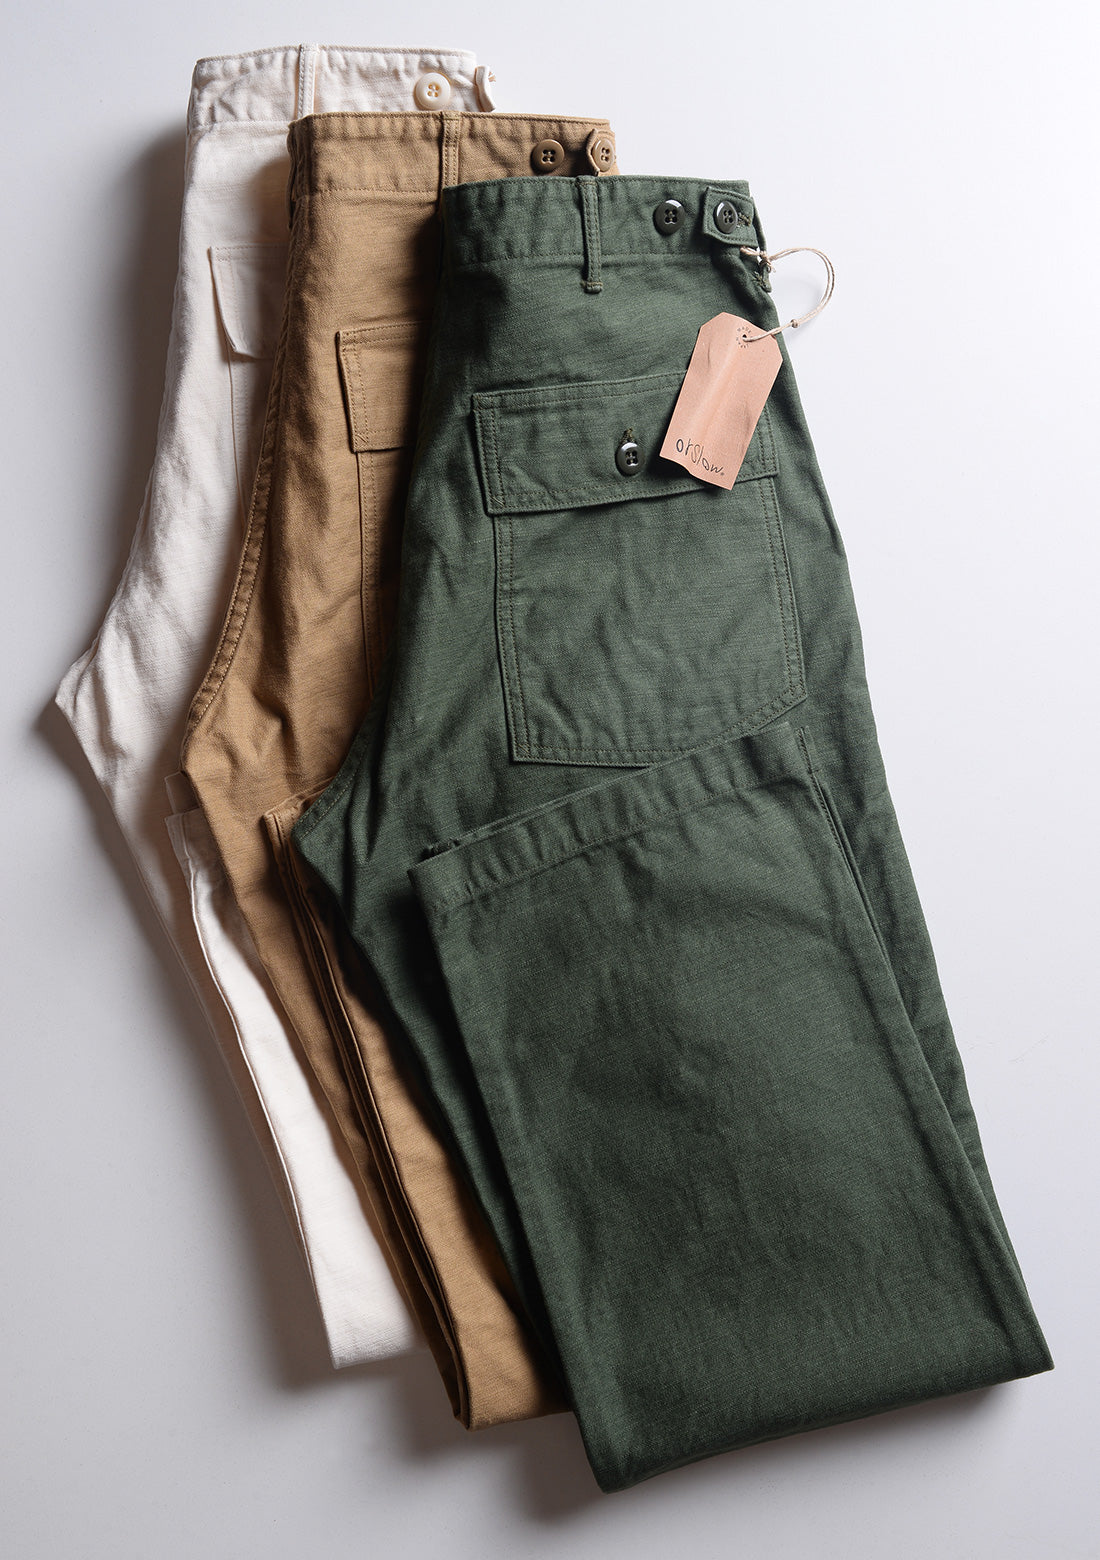 US Army Fatigue Trousers - Army Green